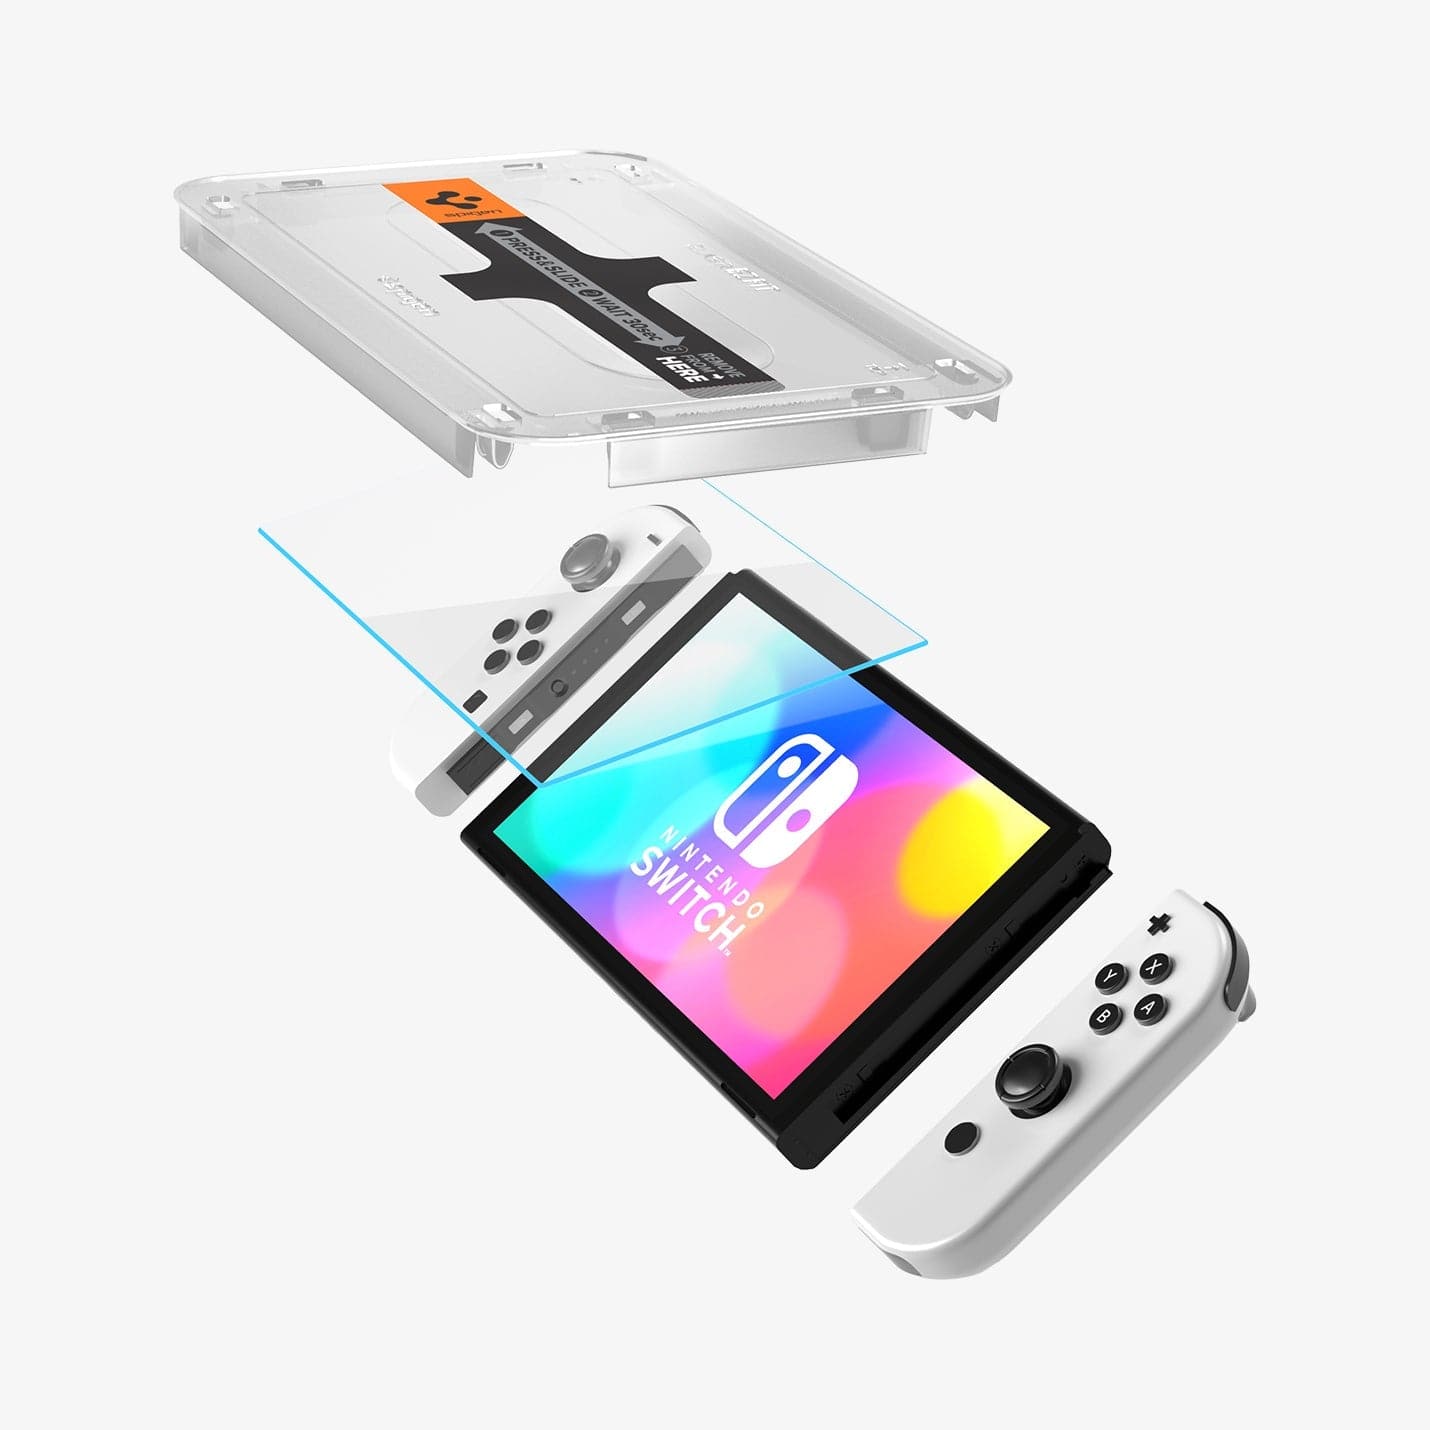 AGL03829 - Nintendo Switch OLED Screen Protector EZ Fit GLAS.tR showing the device, screen protector and ez fit tray